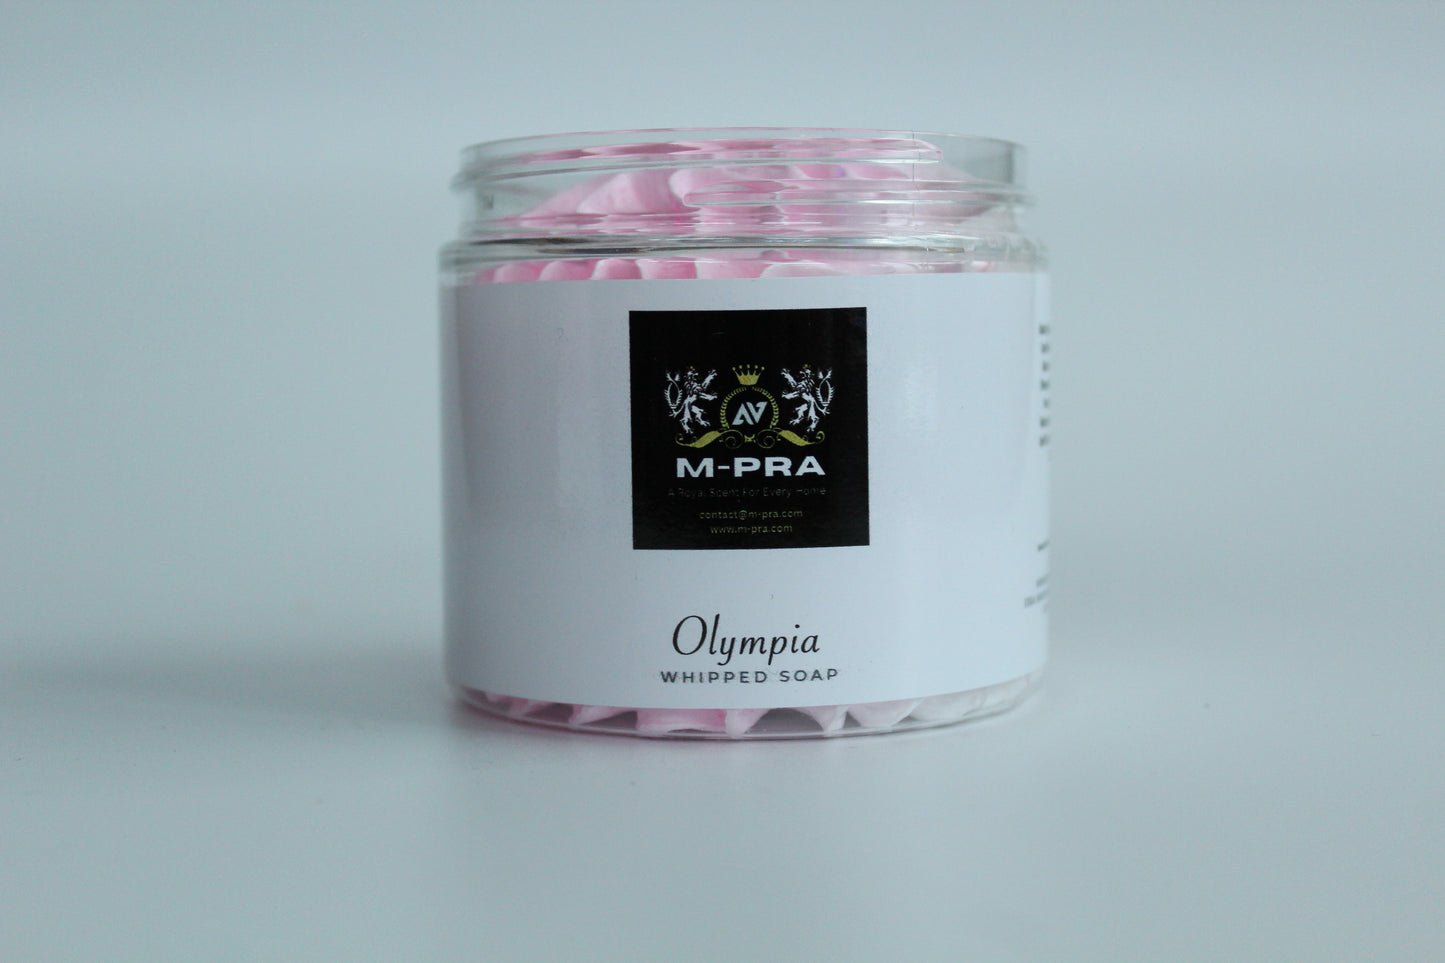 Olympia Whipped Soap